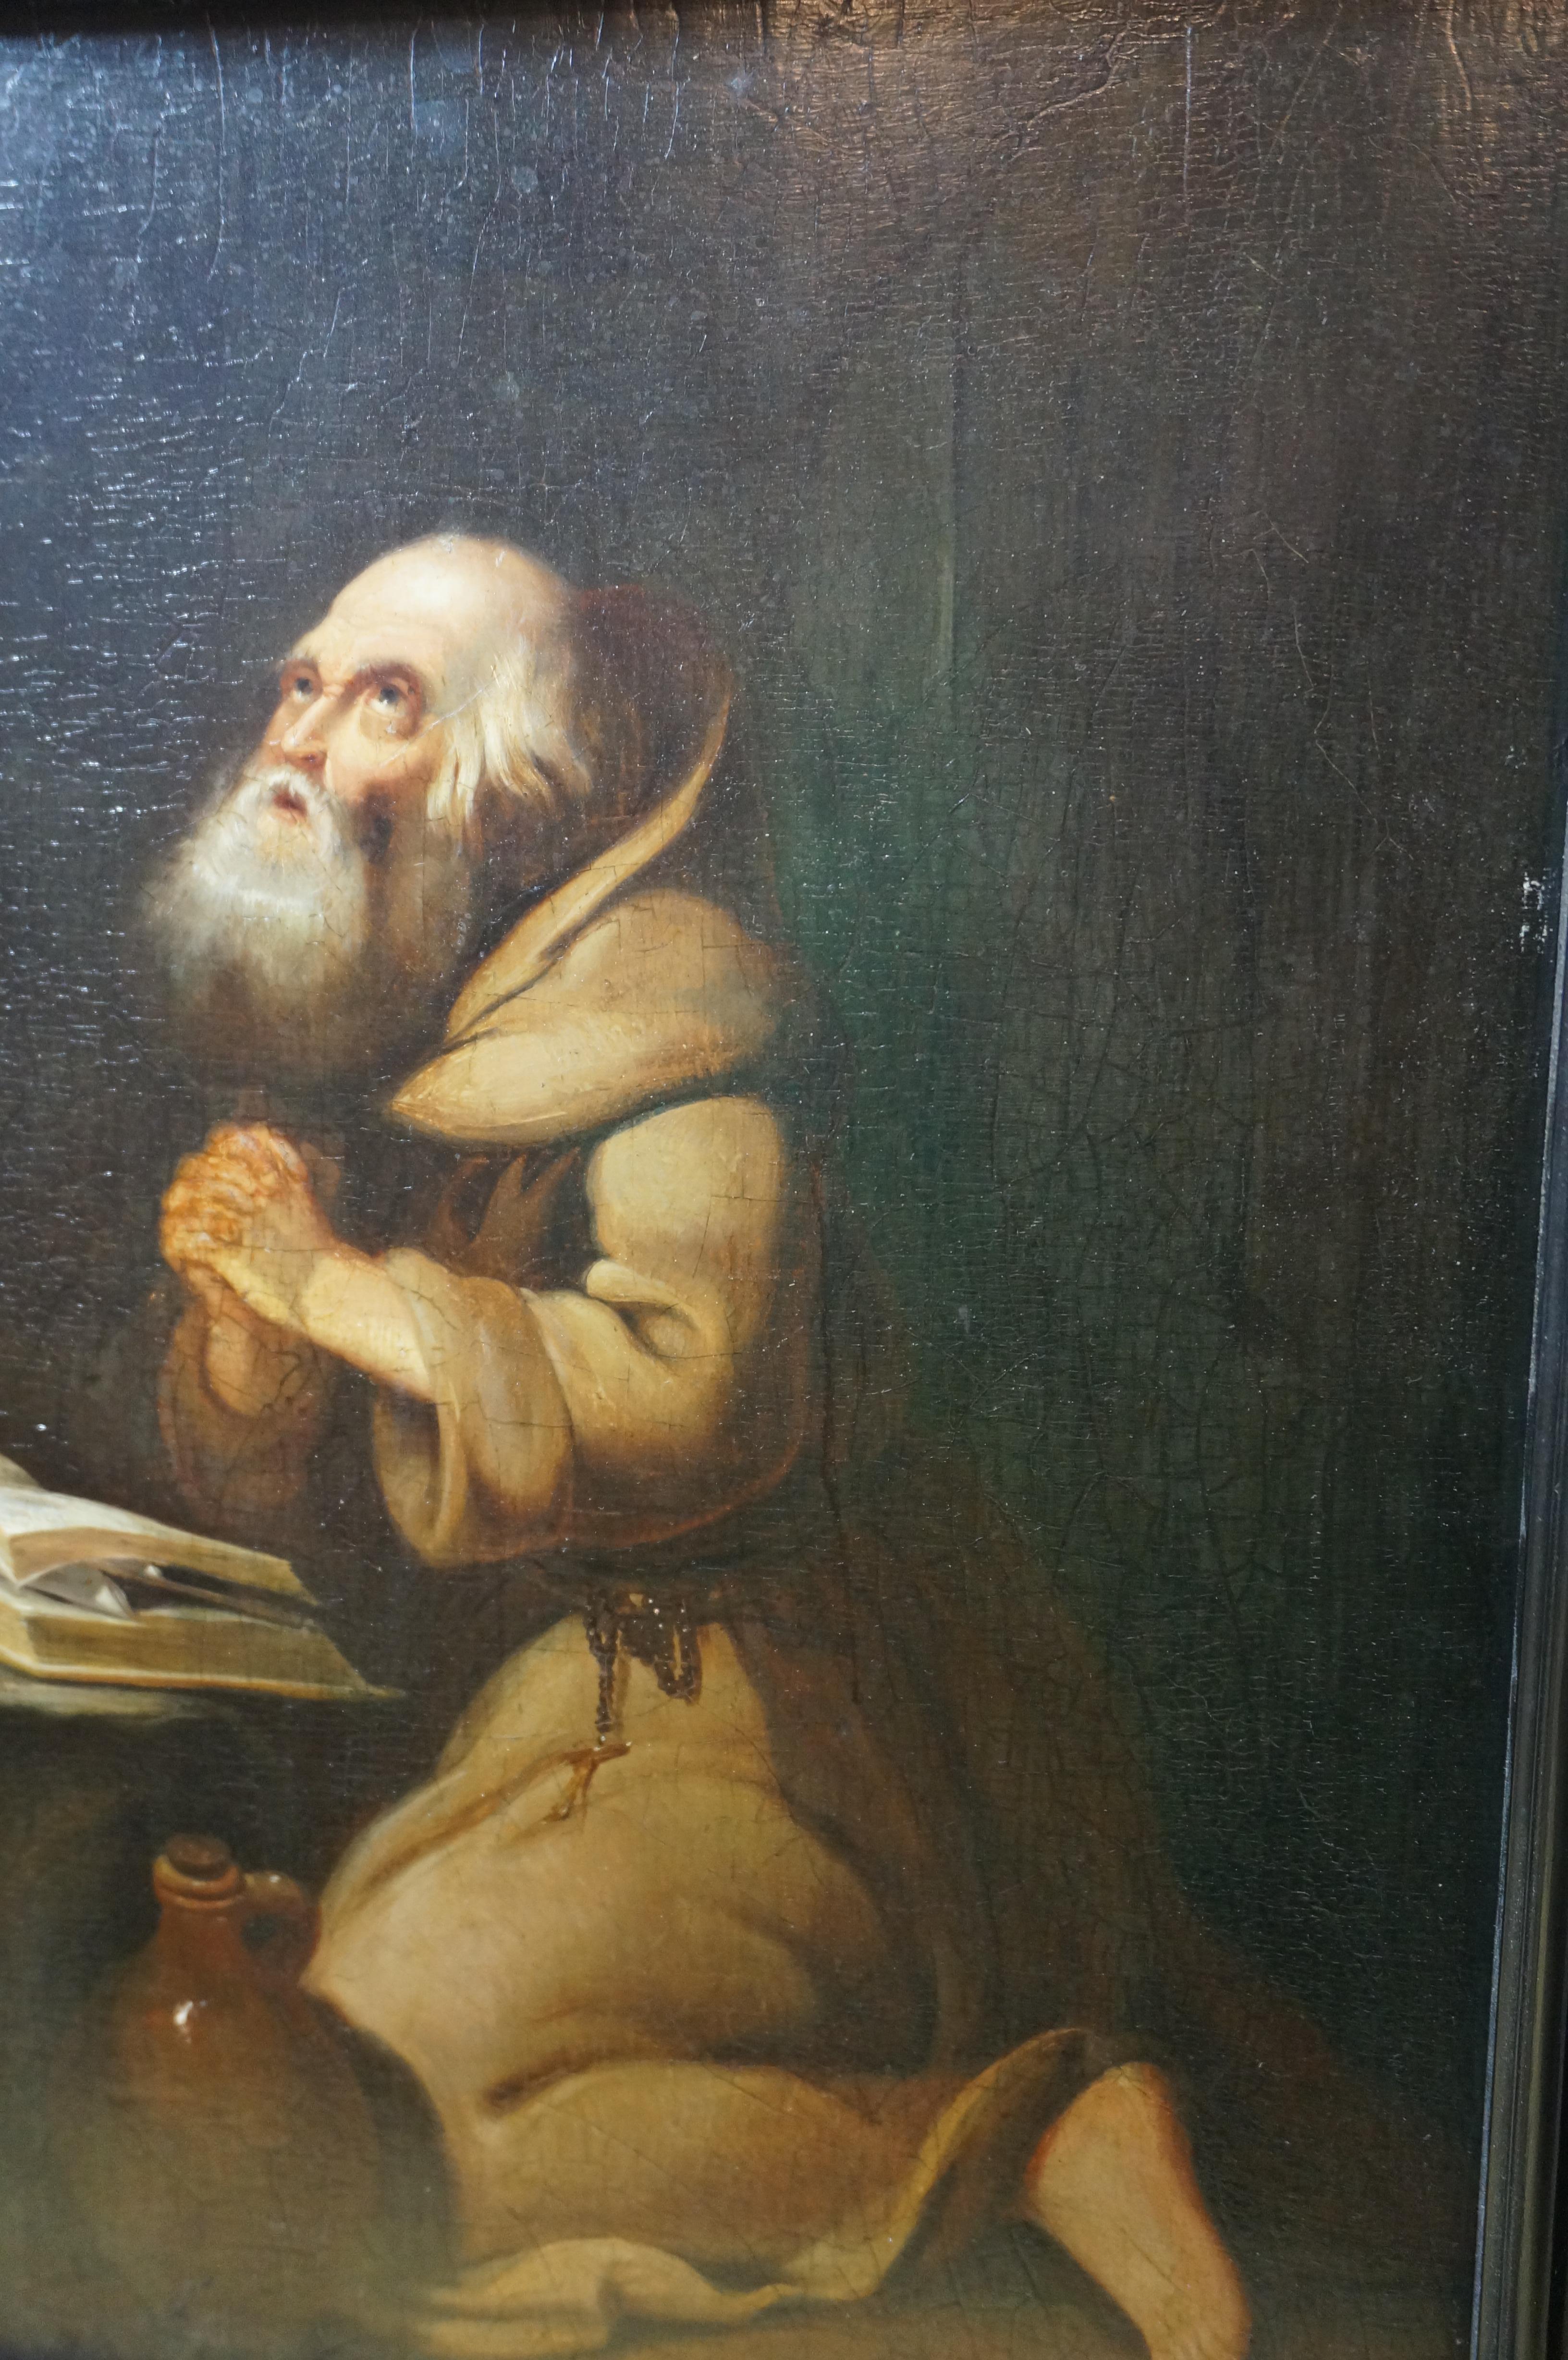 Antique religious painting, Praying hermit, oil on panel, Dutch golden age 1